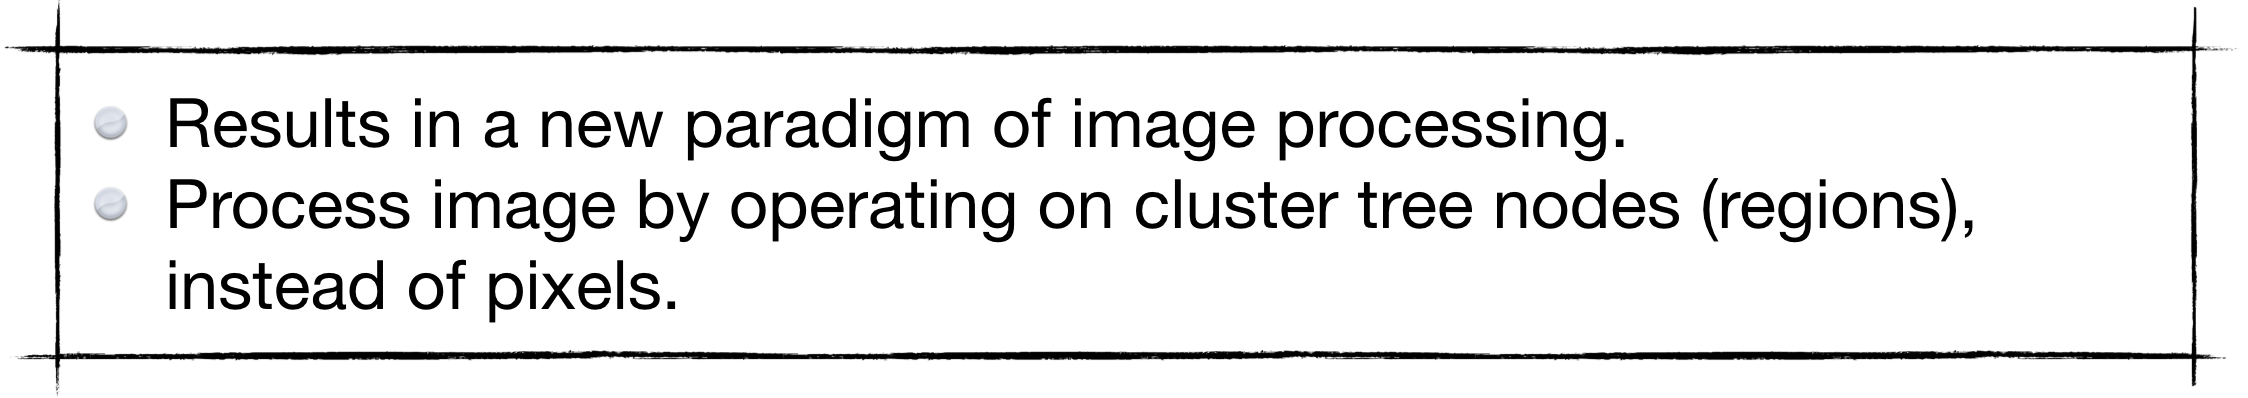 1) Results in a new Paradigm of Image Analysis; 2) Process image by operating on cluster tree nodes (regions), instead of pixels.